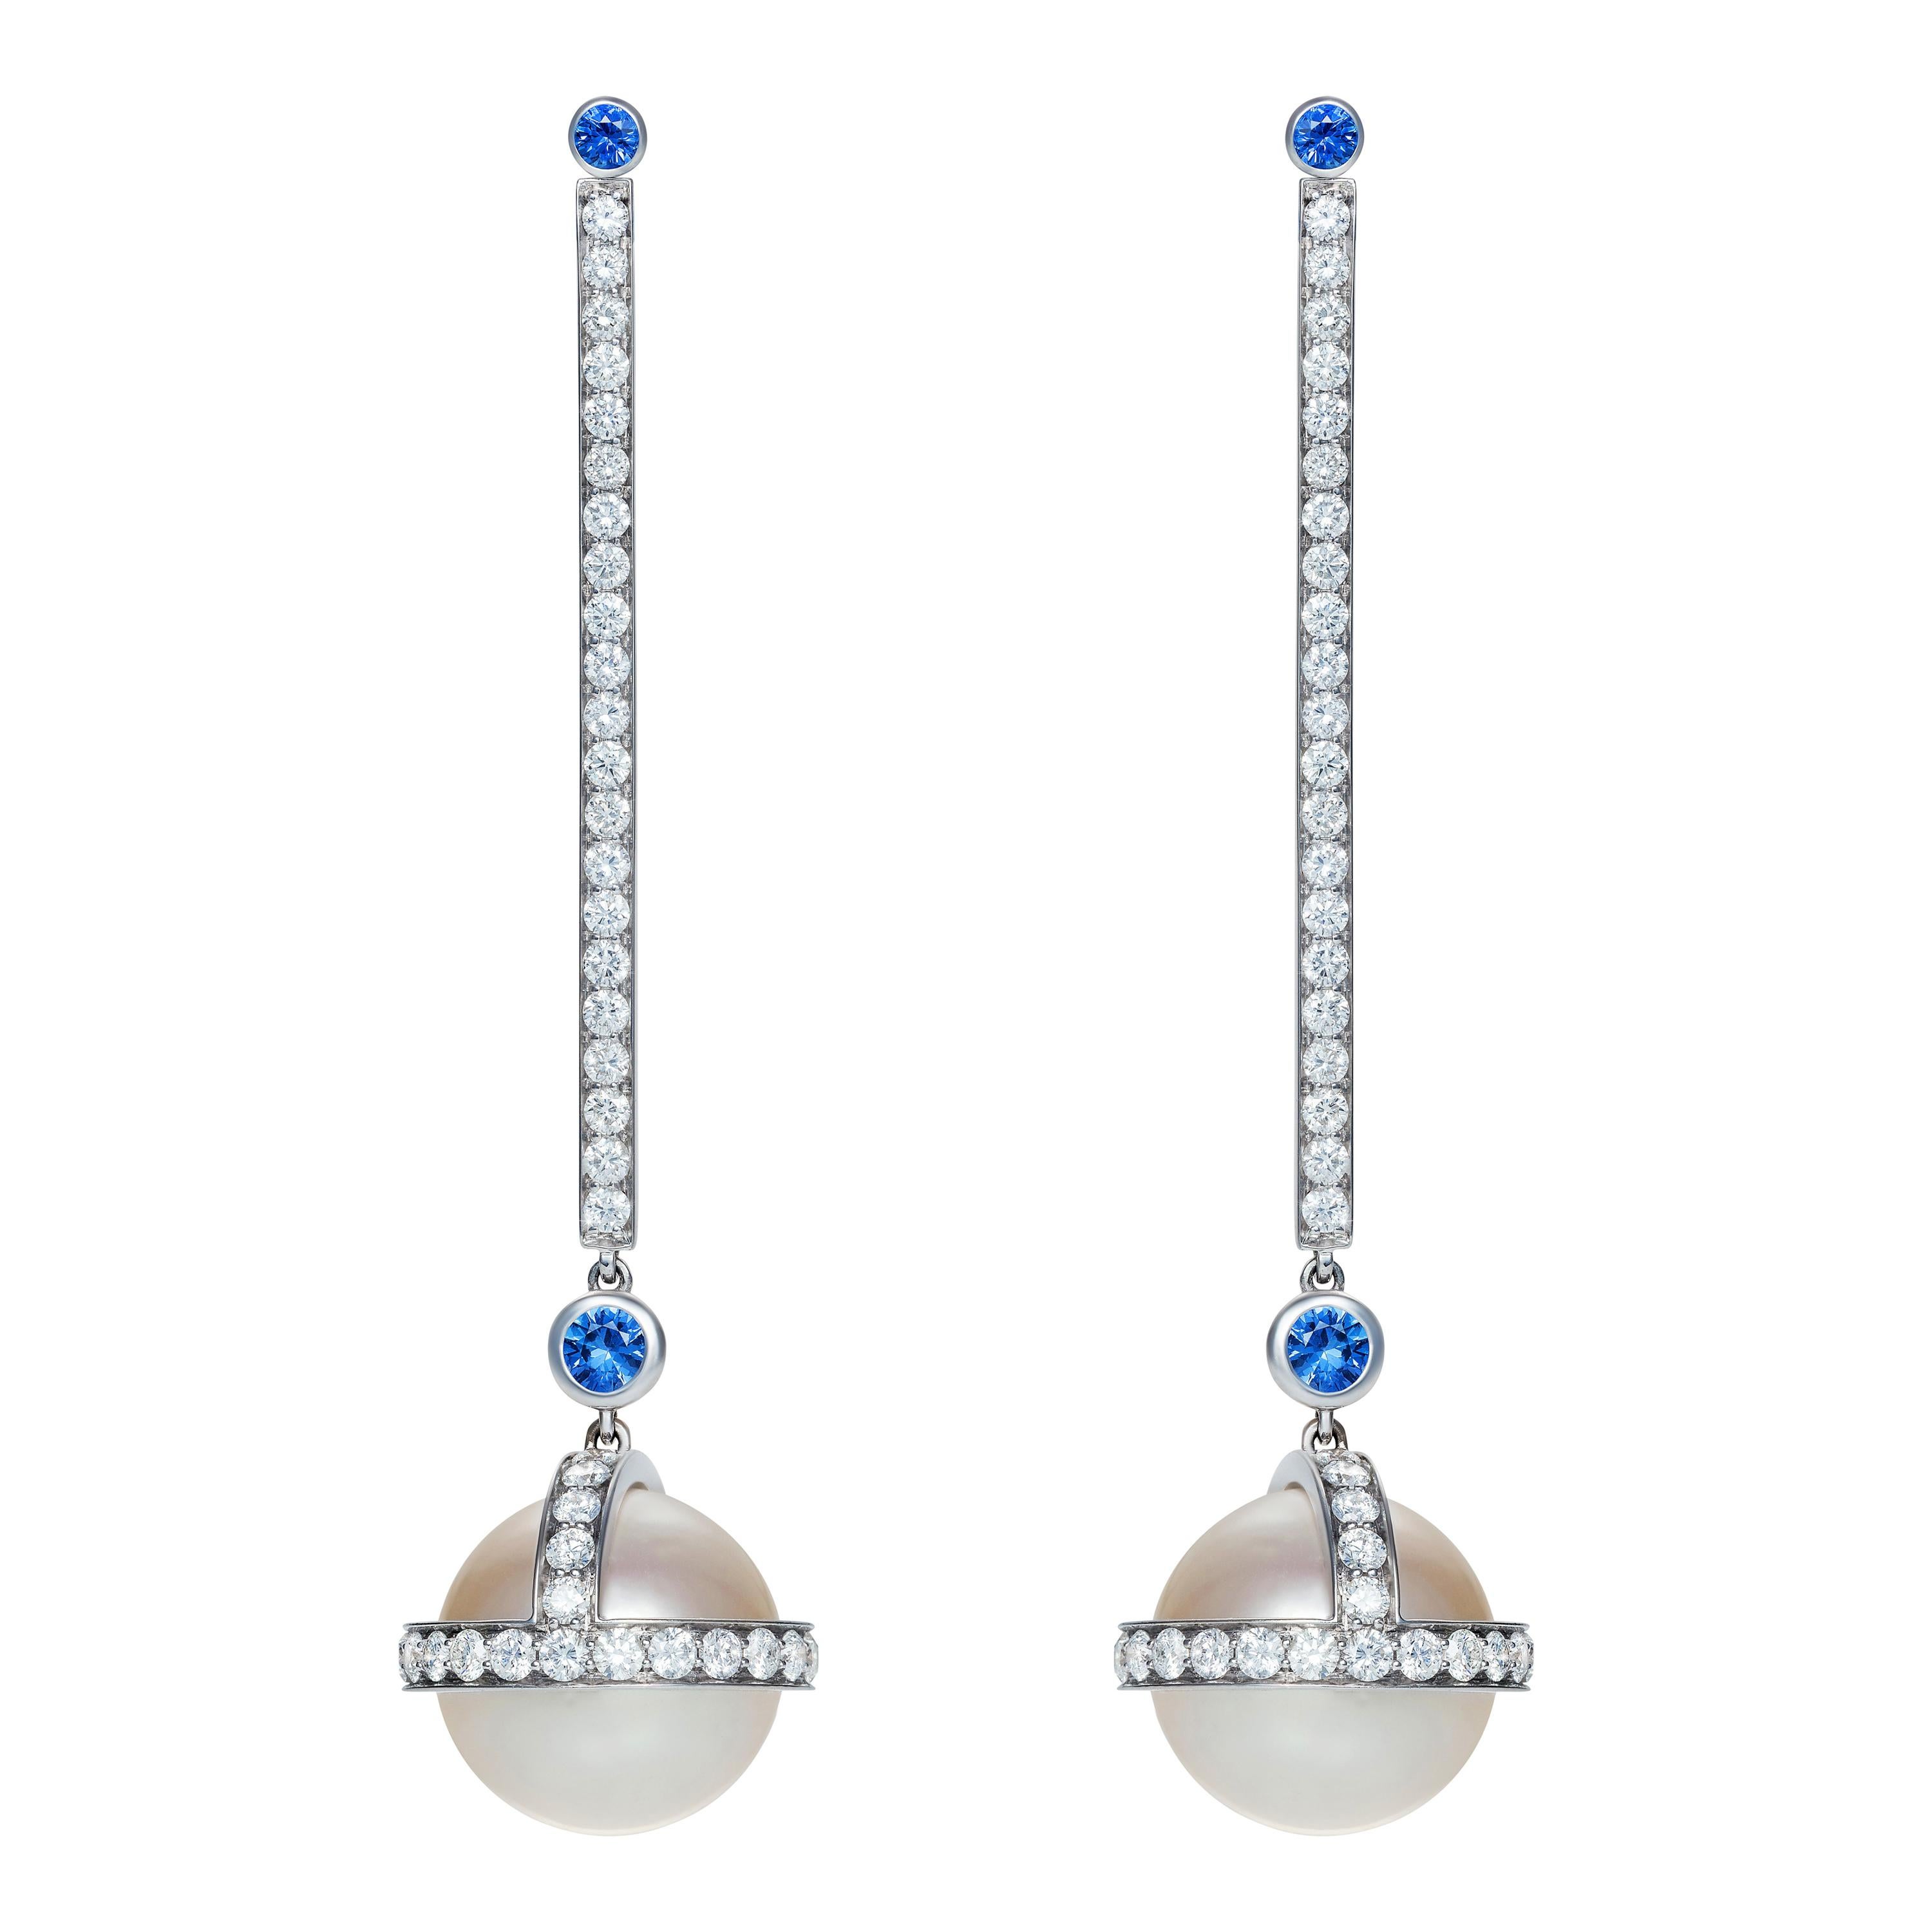 Sybarite Sceptre Drop Earrings in White Gold with White Diamonds & Sapphire